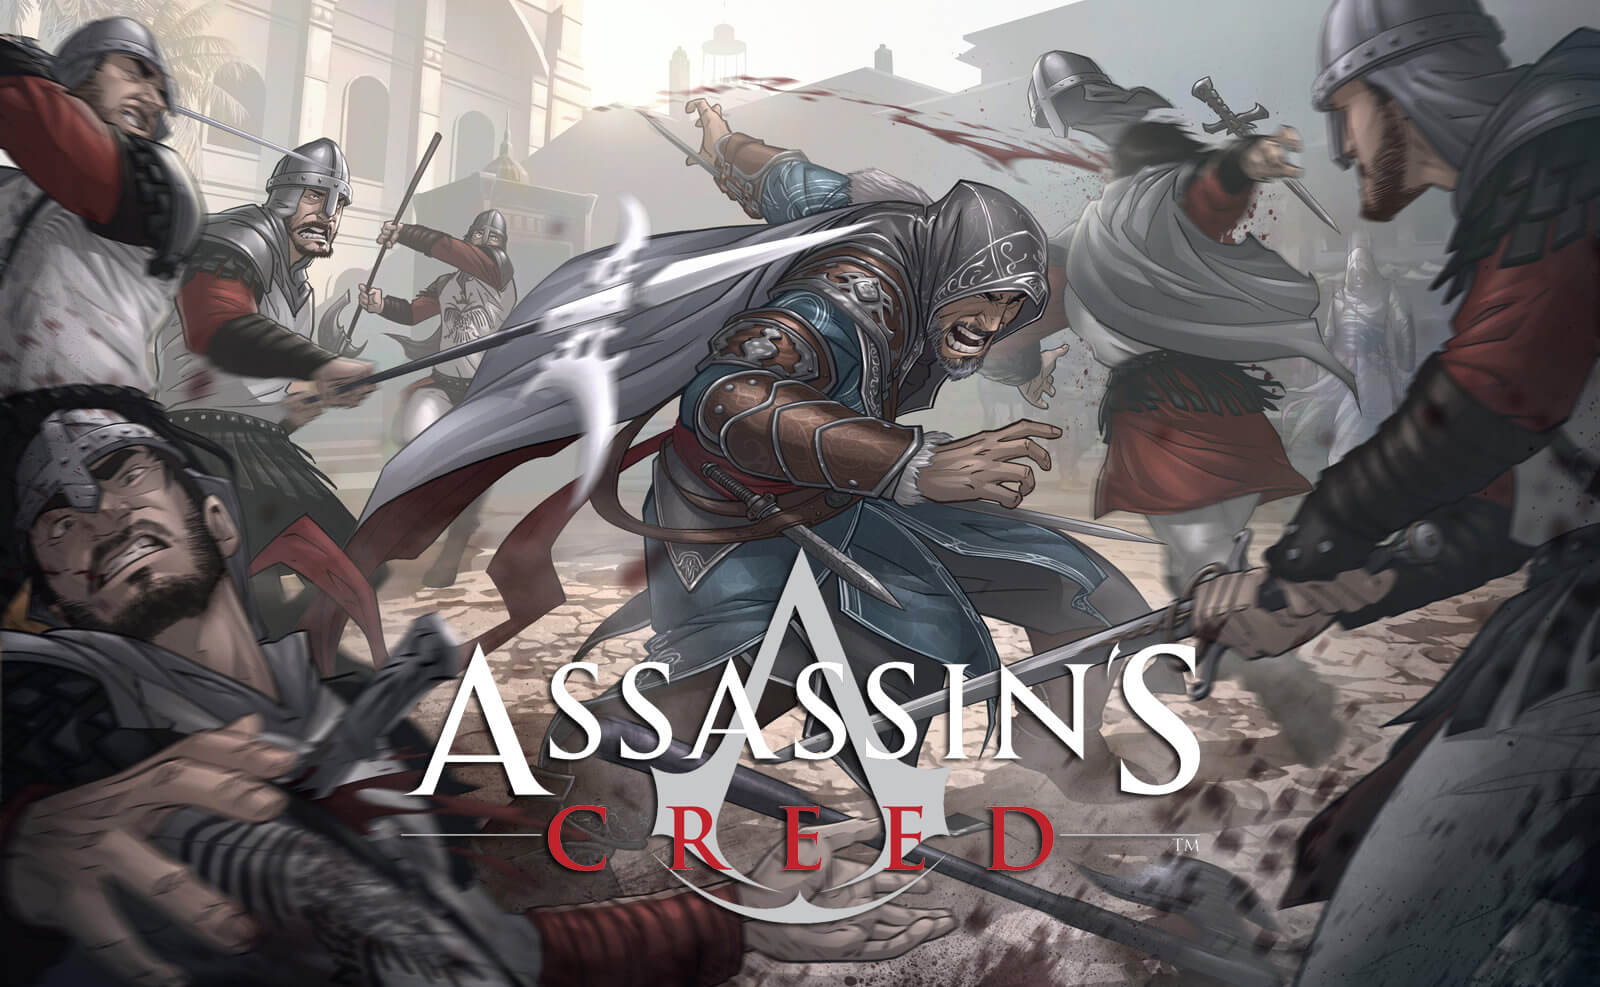 Edward Kenway from Black Flag returns in this new Assassins Creed Webtoon